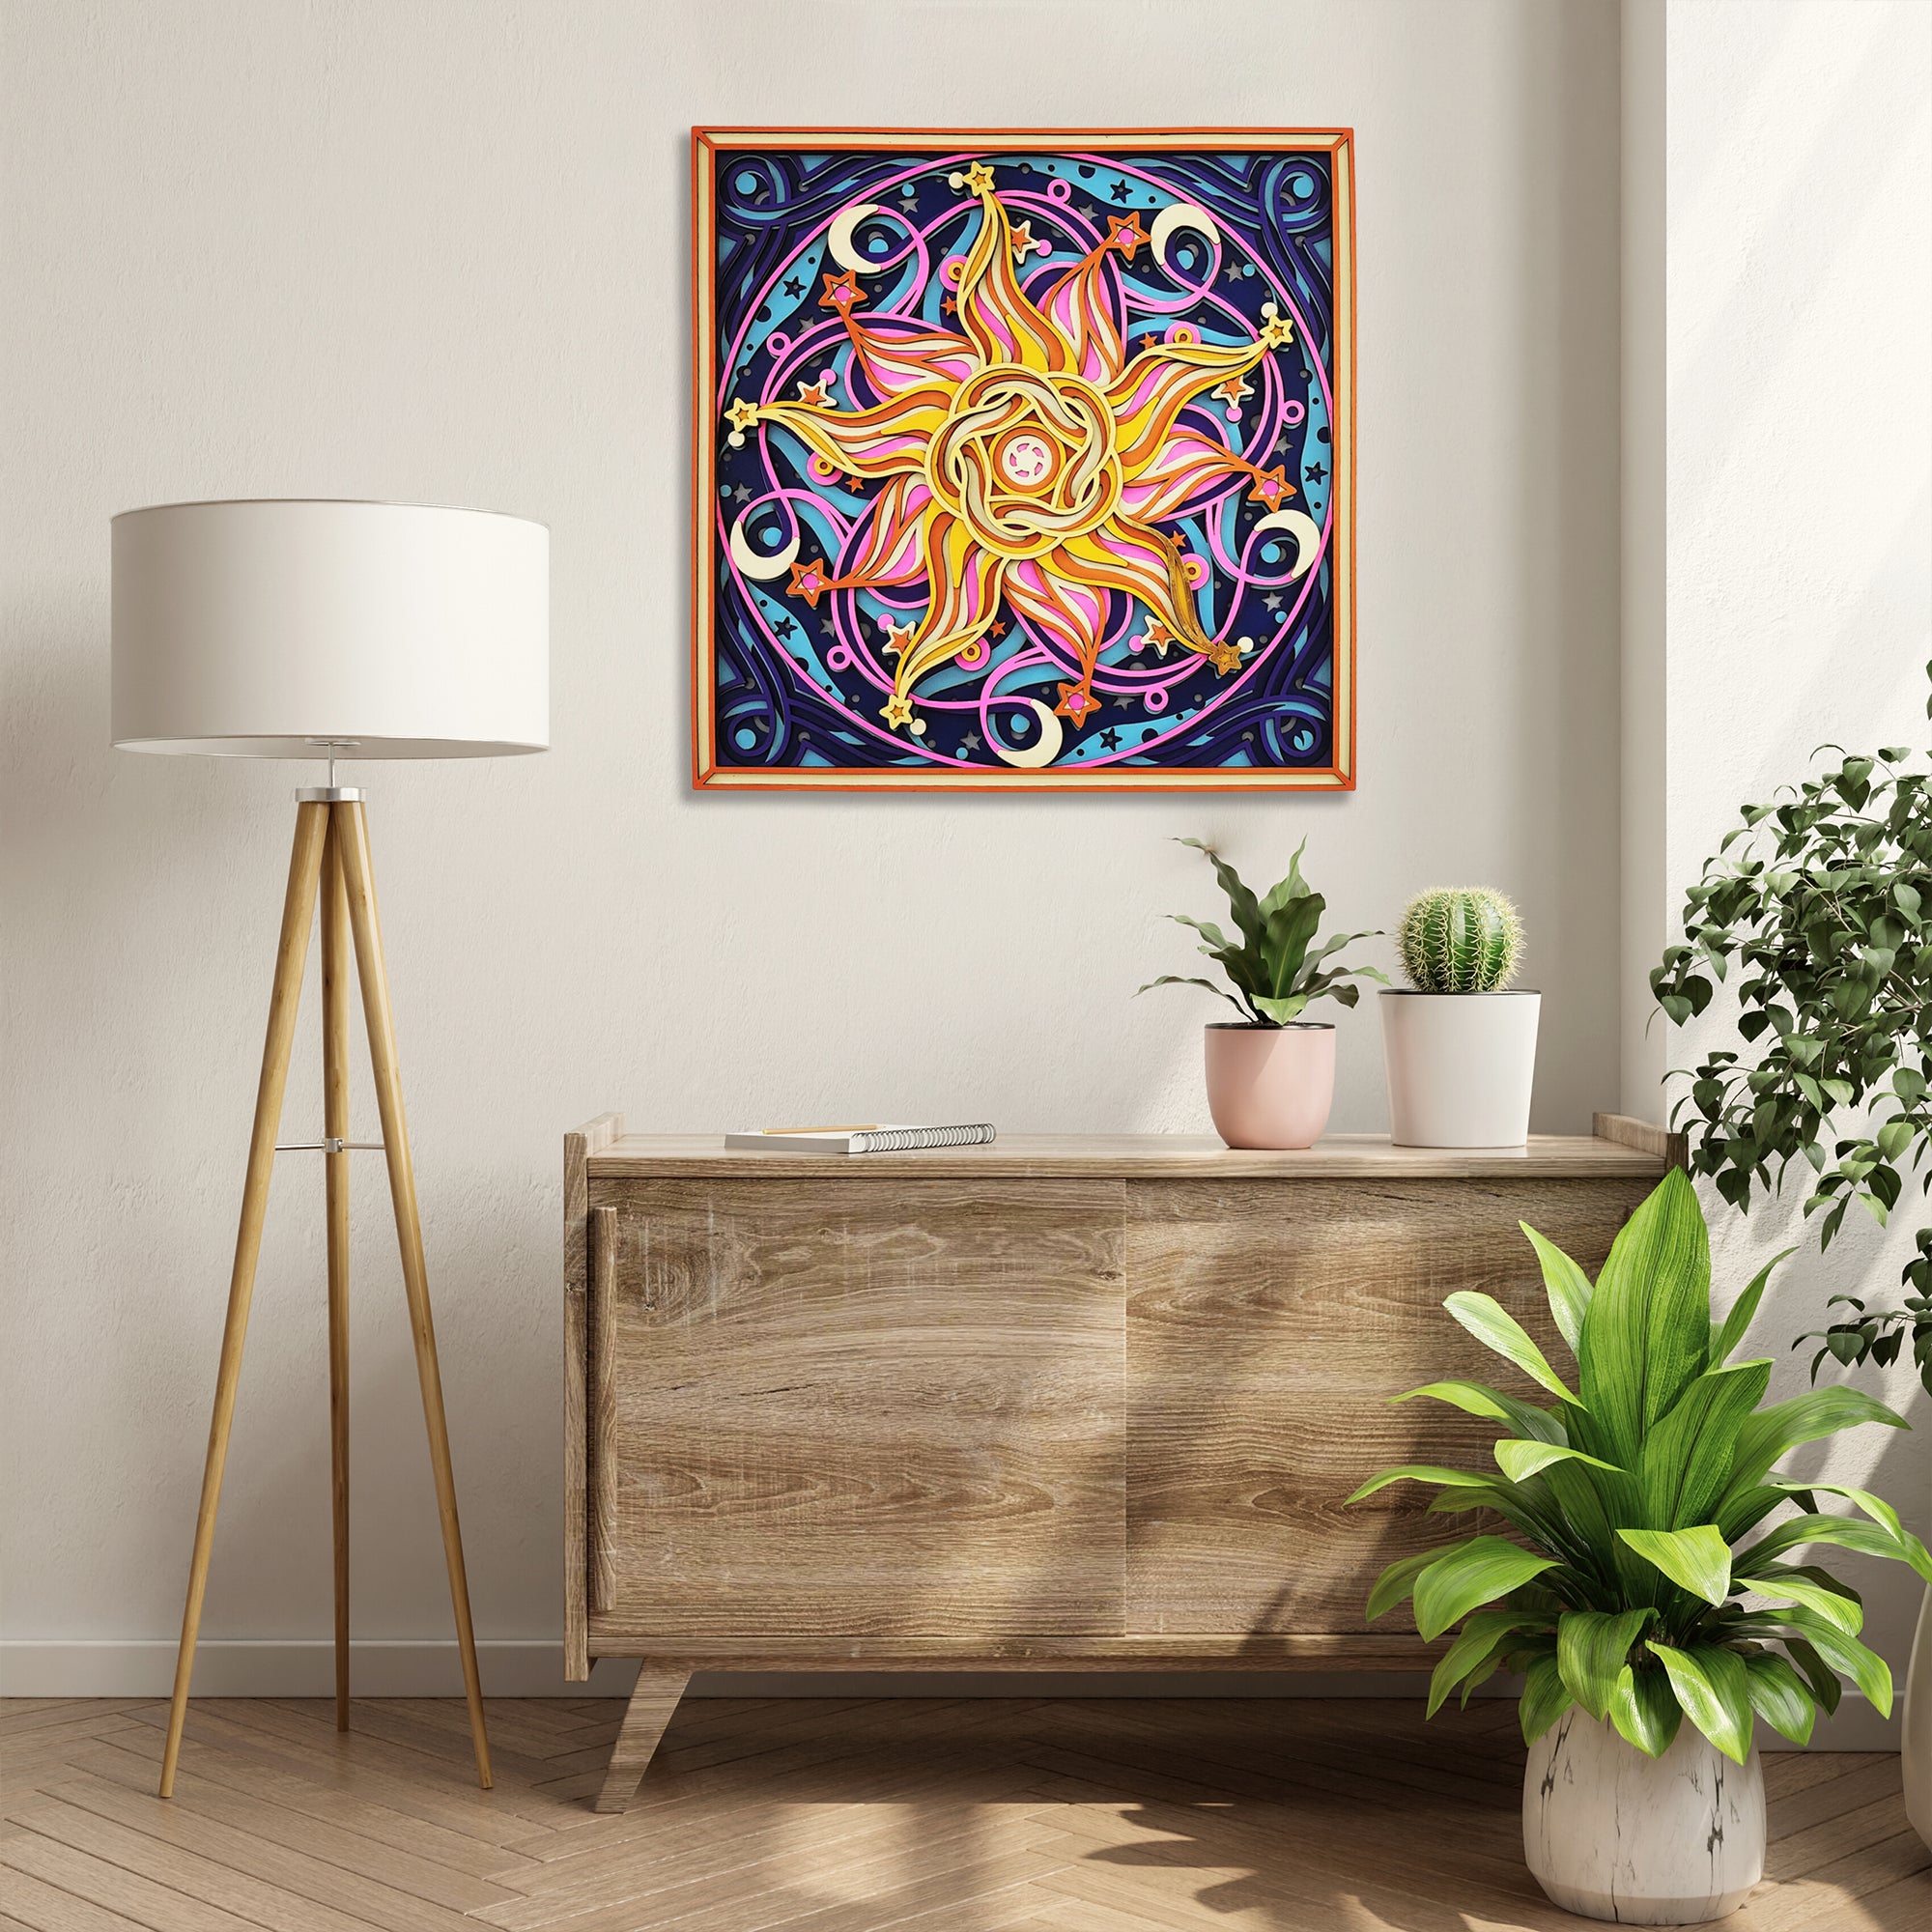 Add cosmic touch to your house